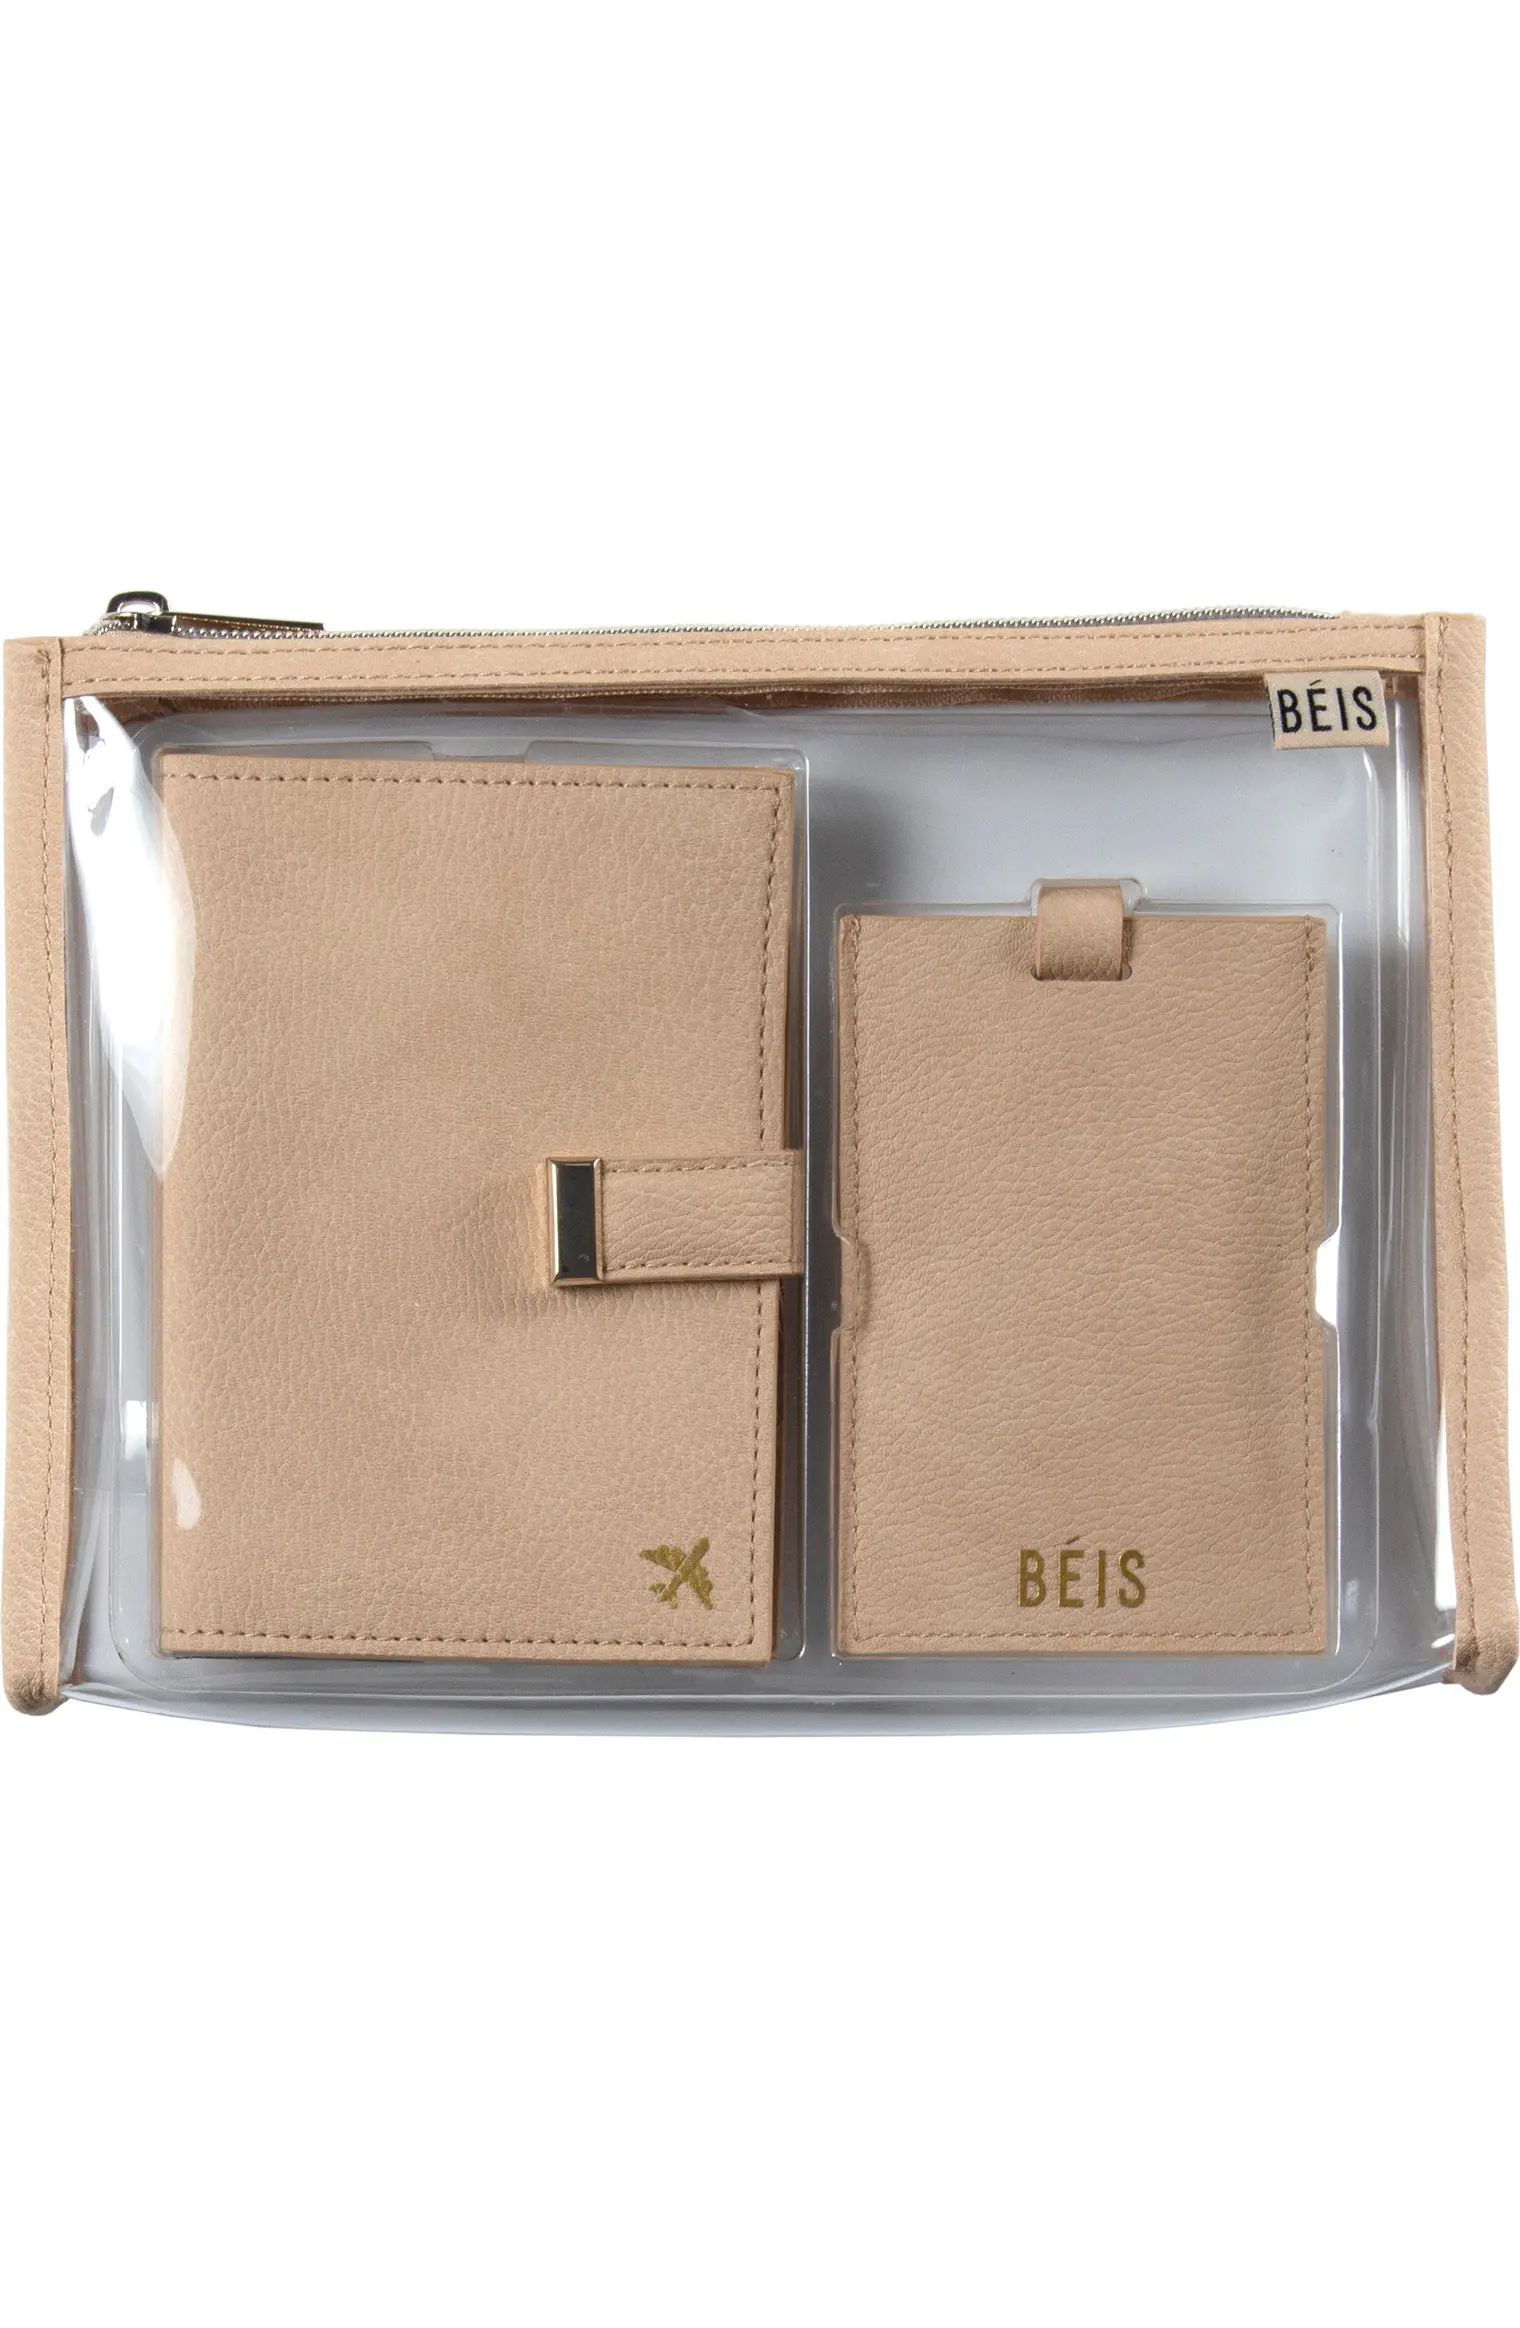 The Travel Set Passport Wallet, Pouch & Luggage Tag | Nordstrom